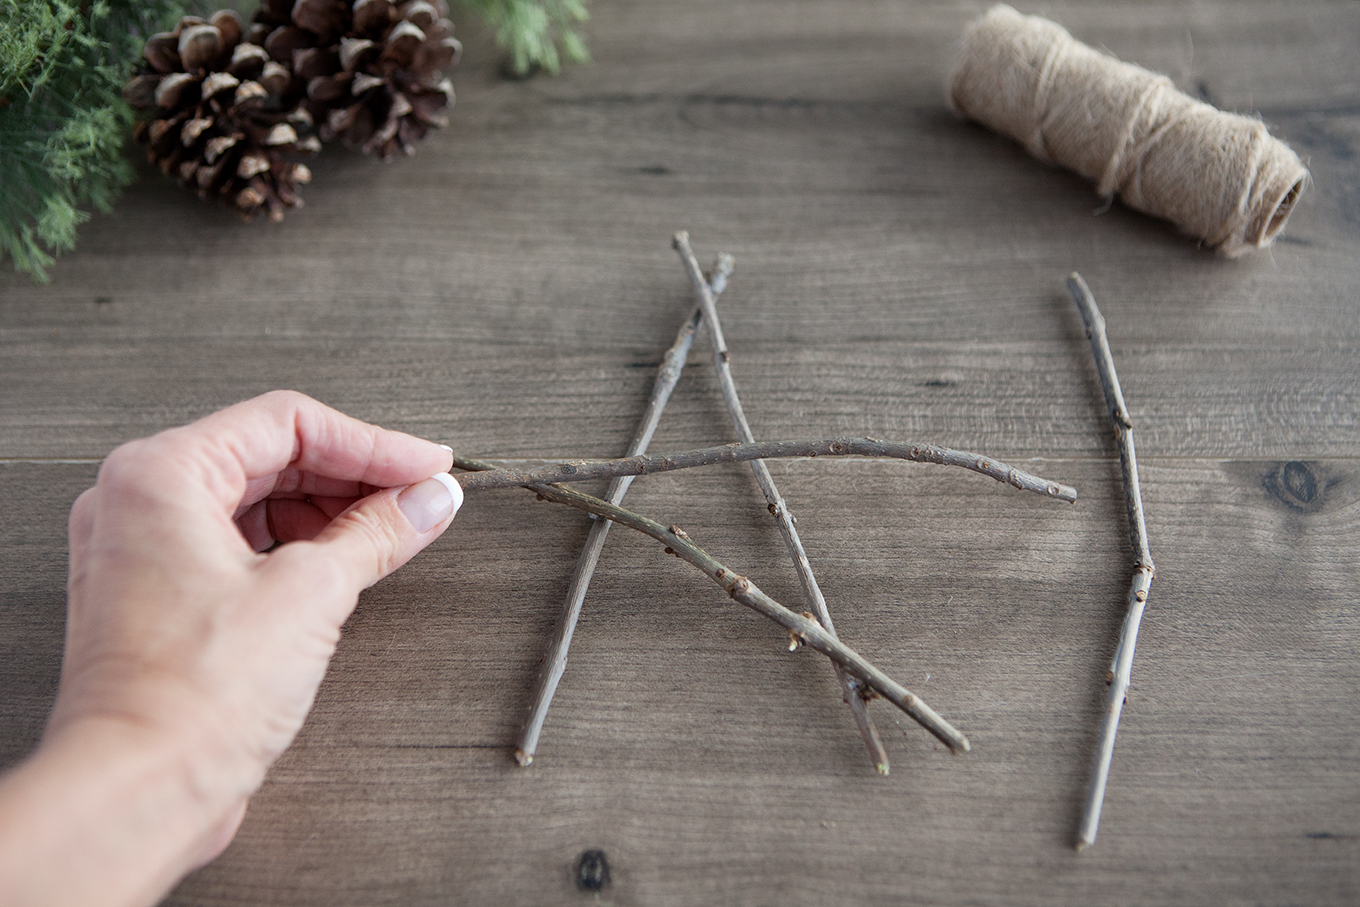 Bring a touch of nature indoors this year as you decorate your tree – learn how to make rustic twig Christmas ornaments! They're simple, inexpensive and look beautiful!